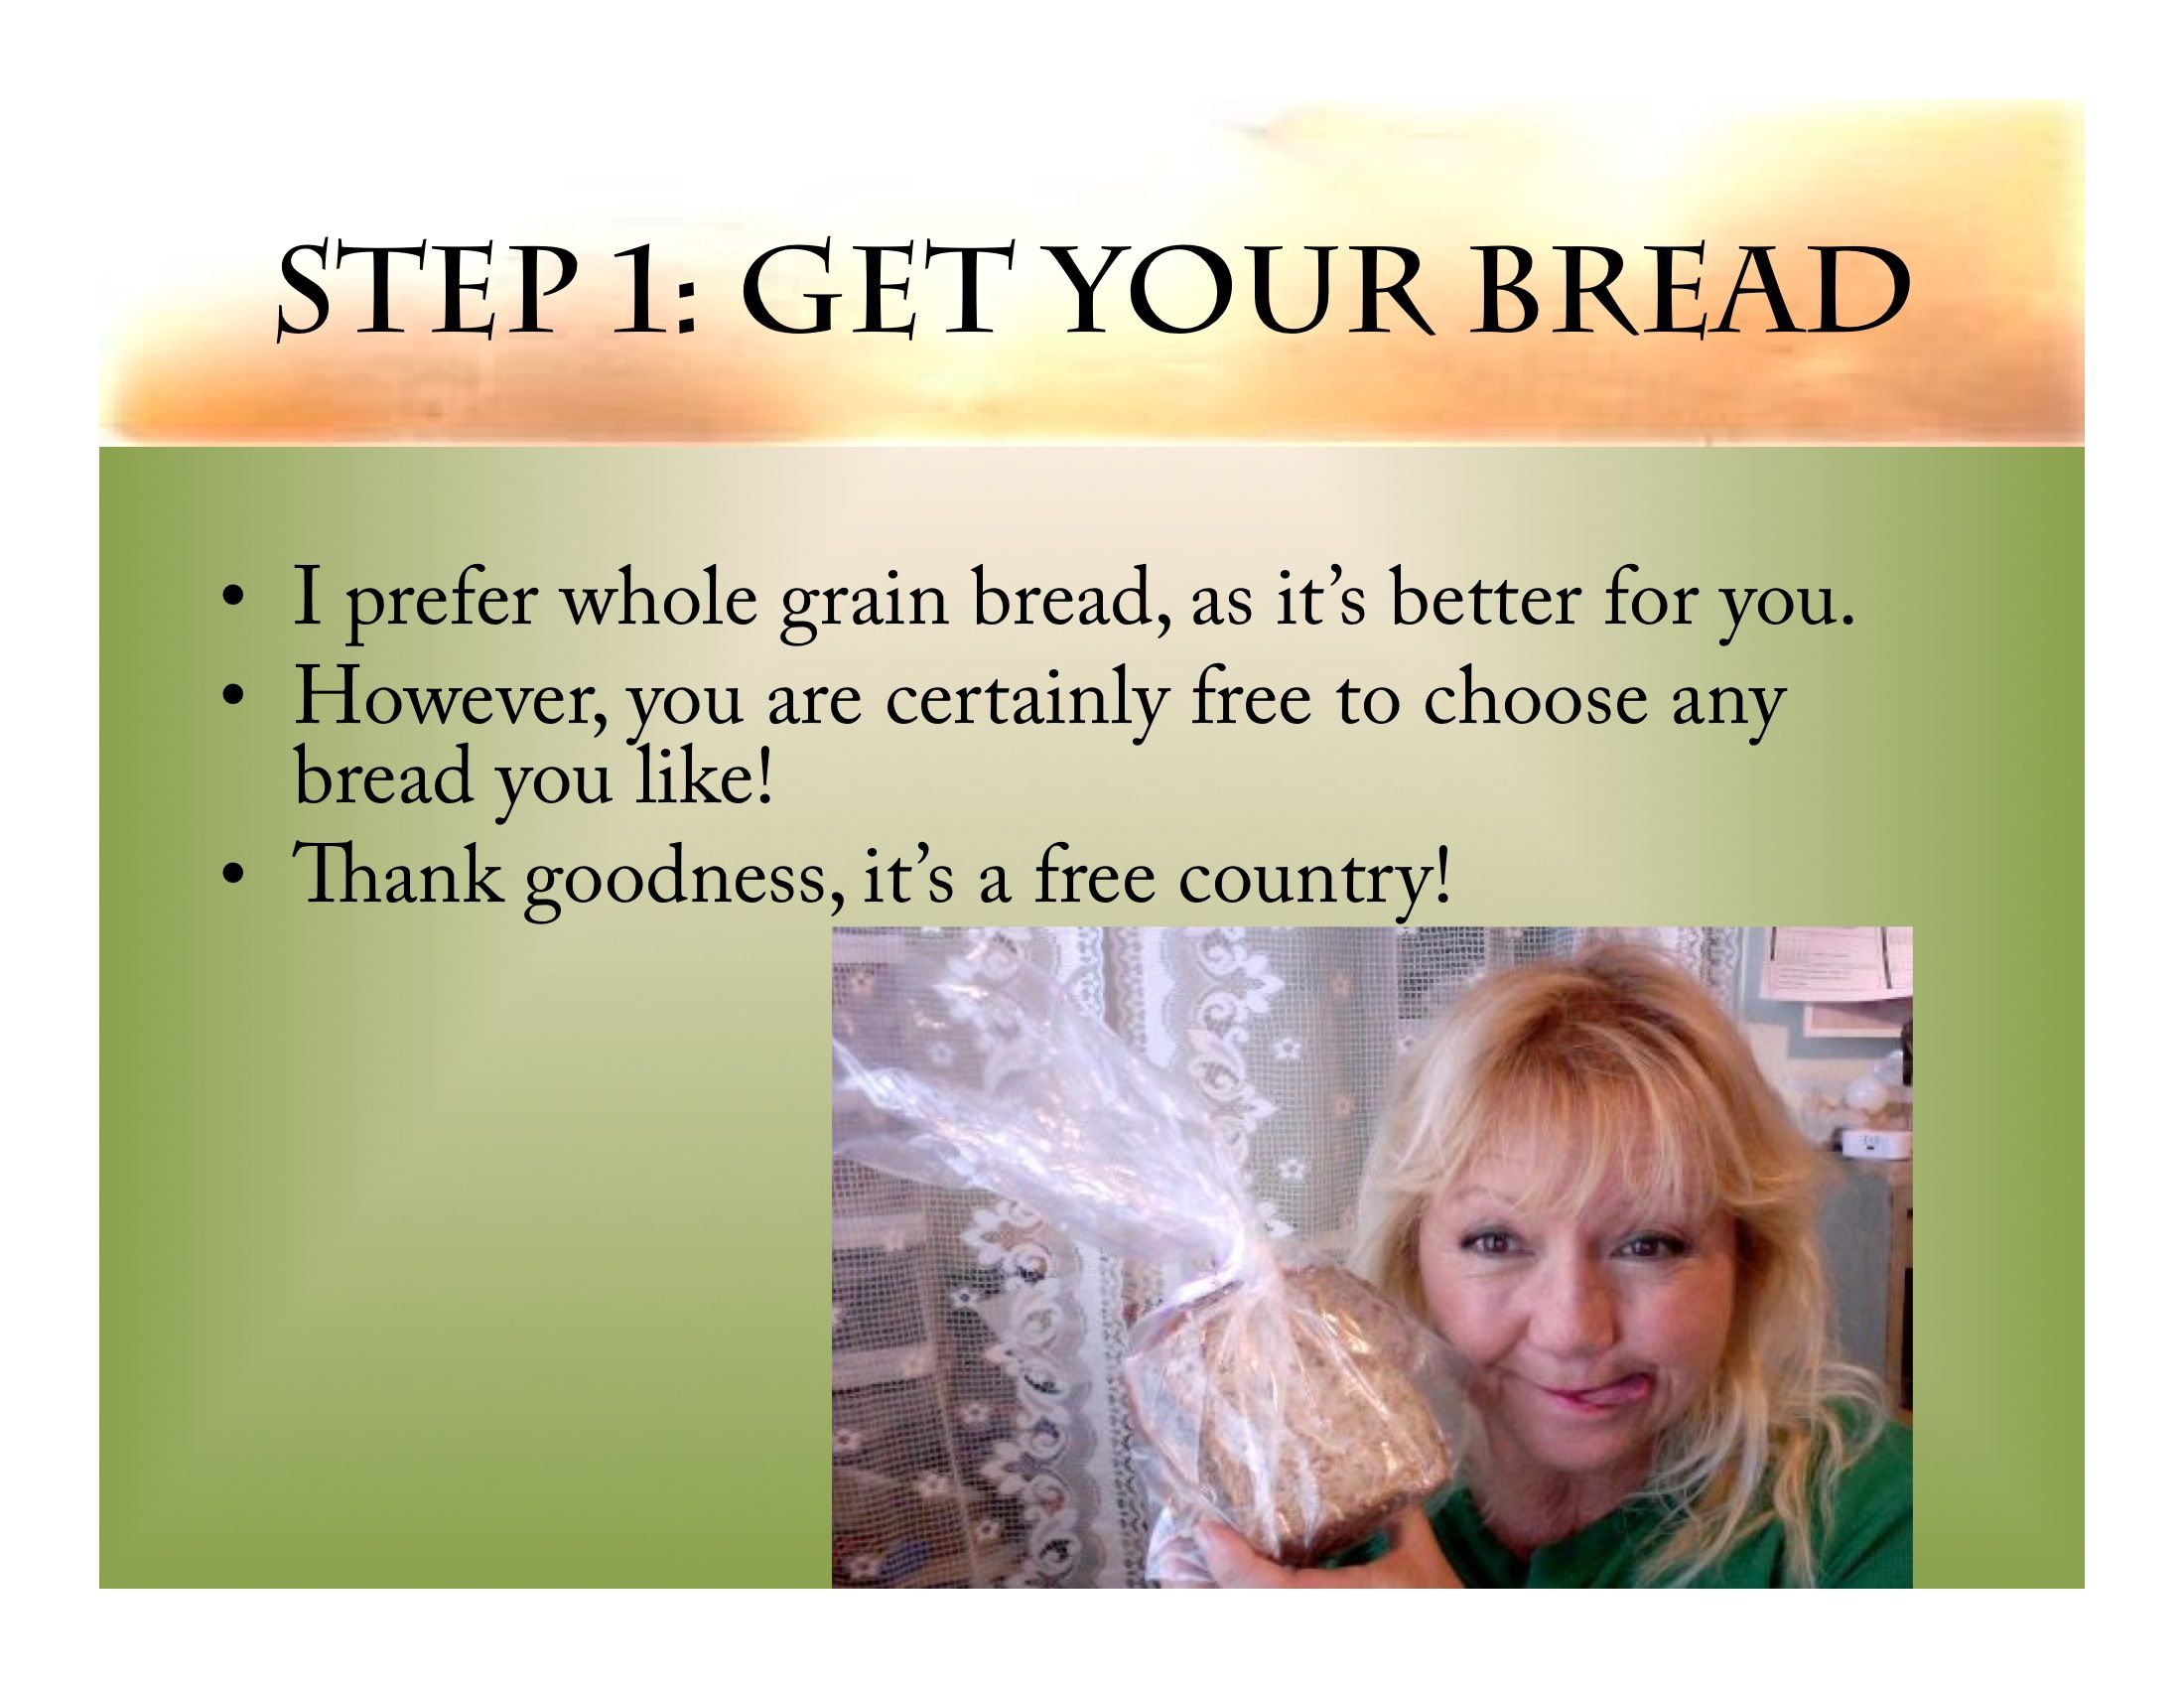 Step 1: Get Your Bread